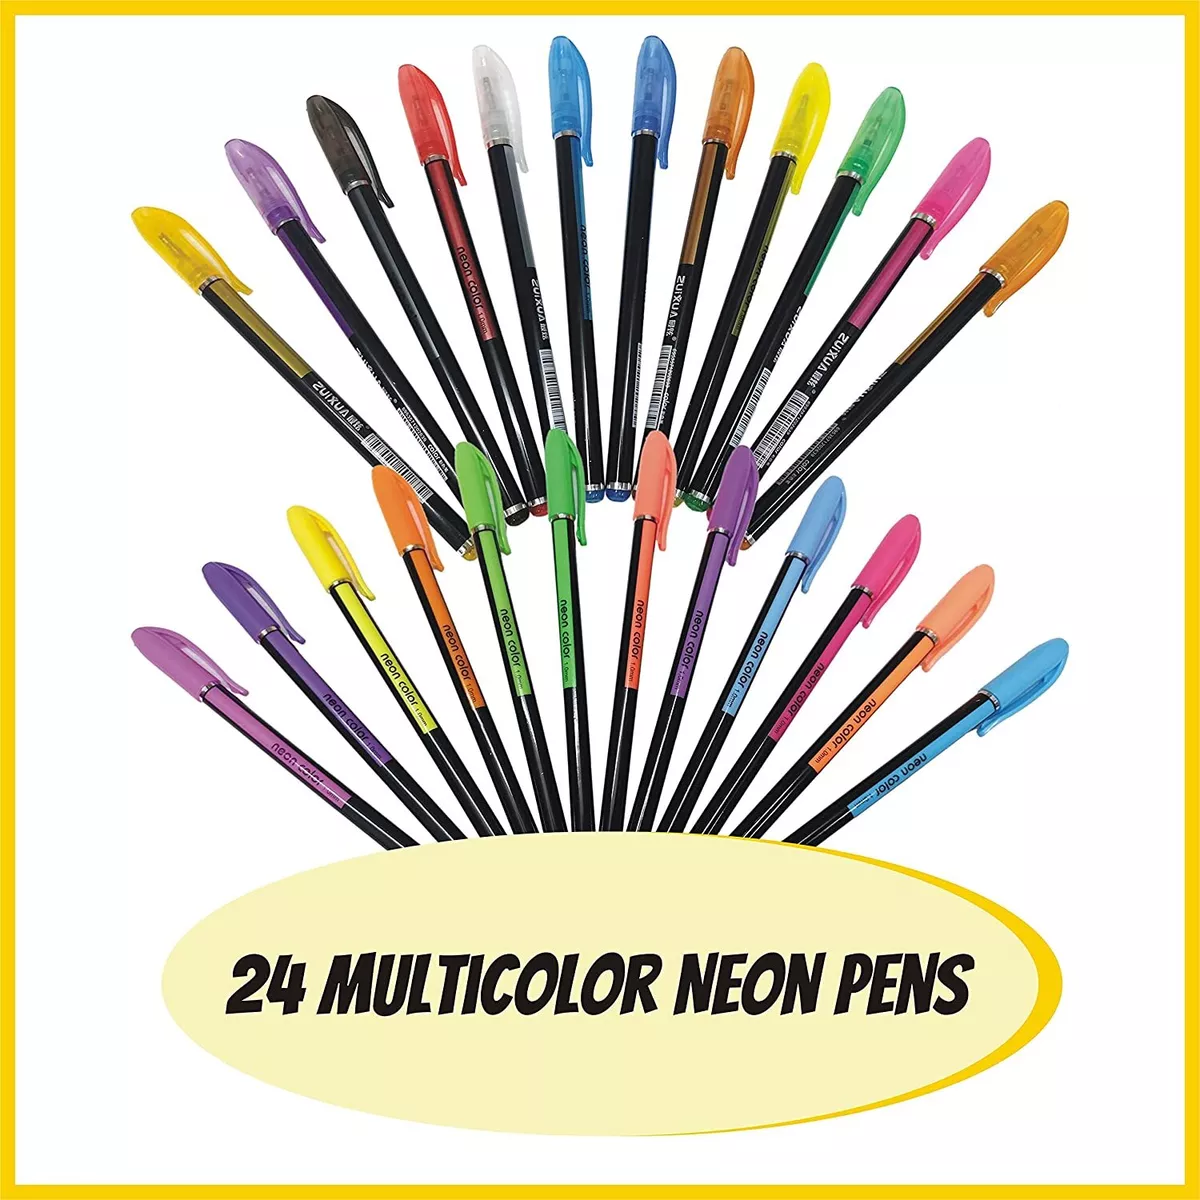 12 pcs Color Gel Neon Pen Set Multicolor Ballpoint Pens for Writing,  Drawing, Painting & Doodling